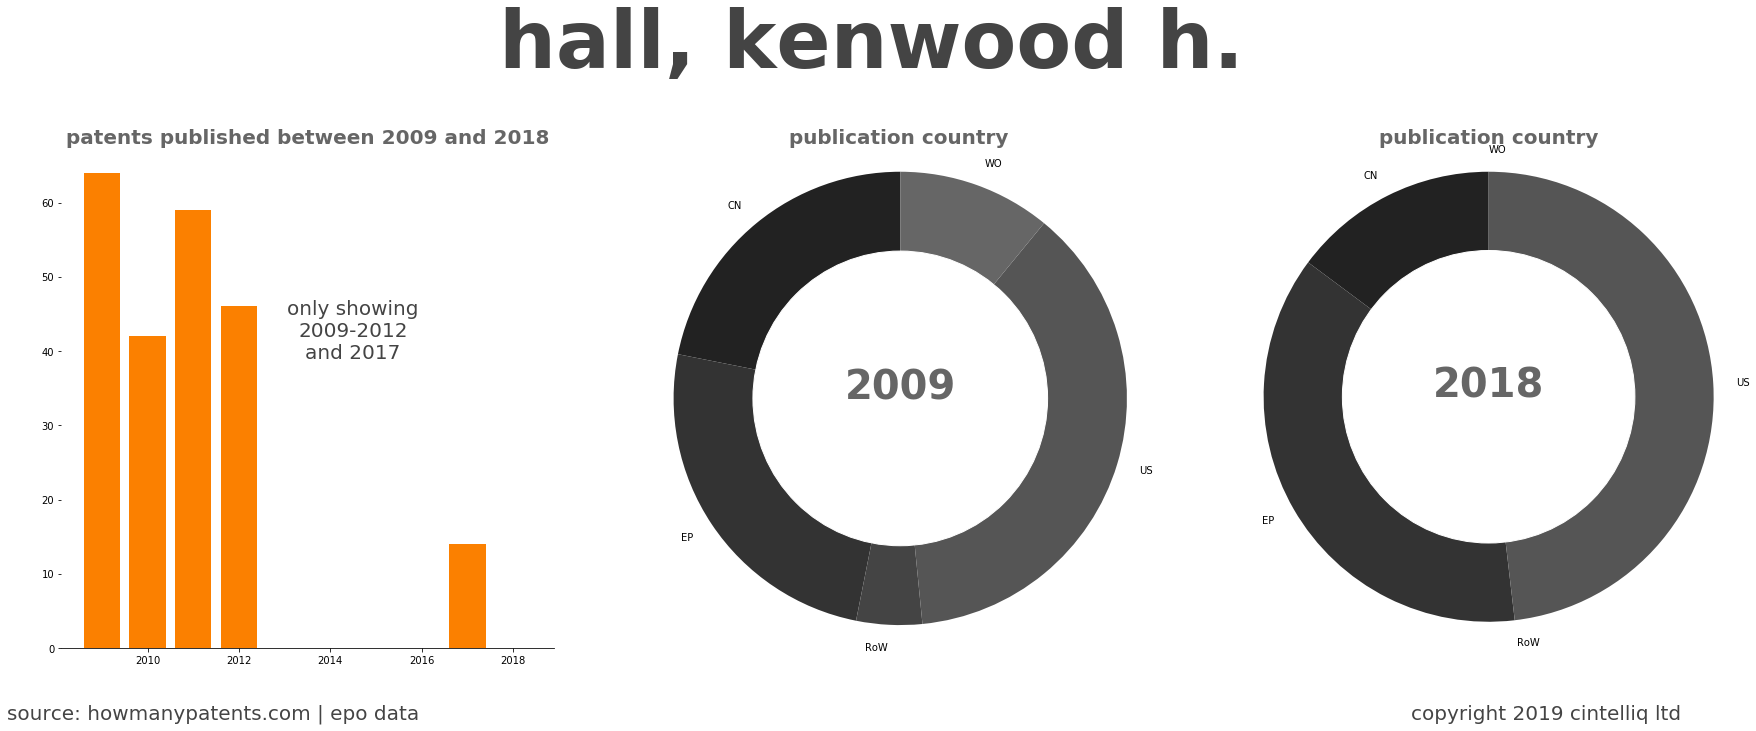 summary of patents for Hall, Kenwood H.